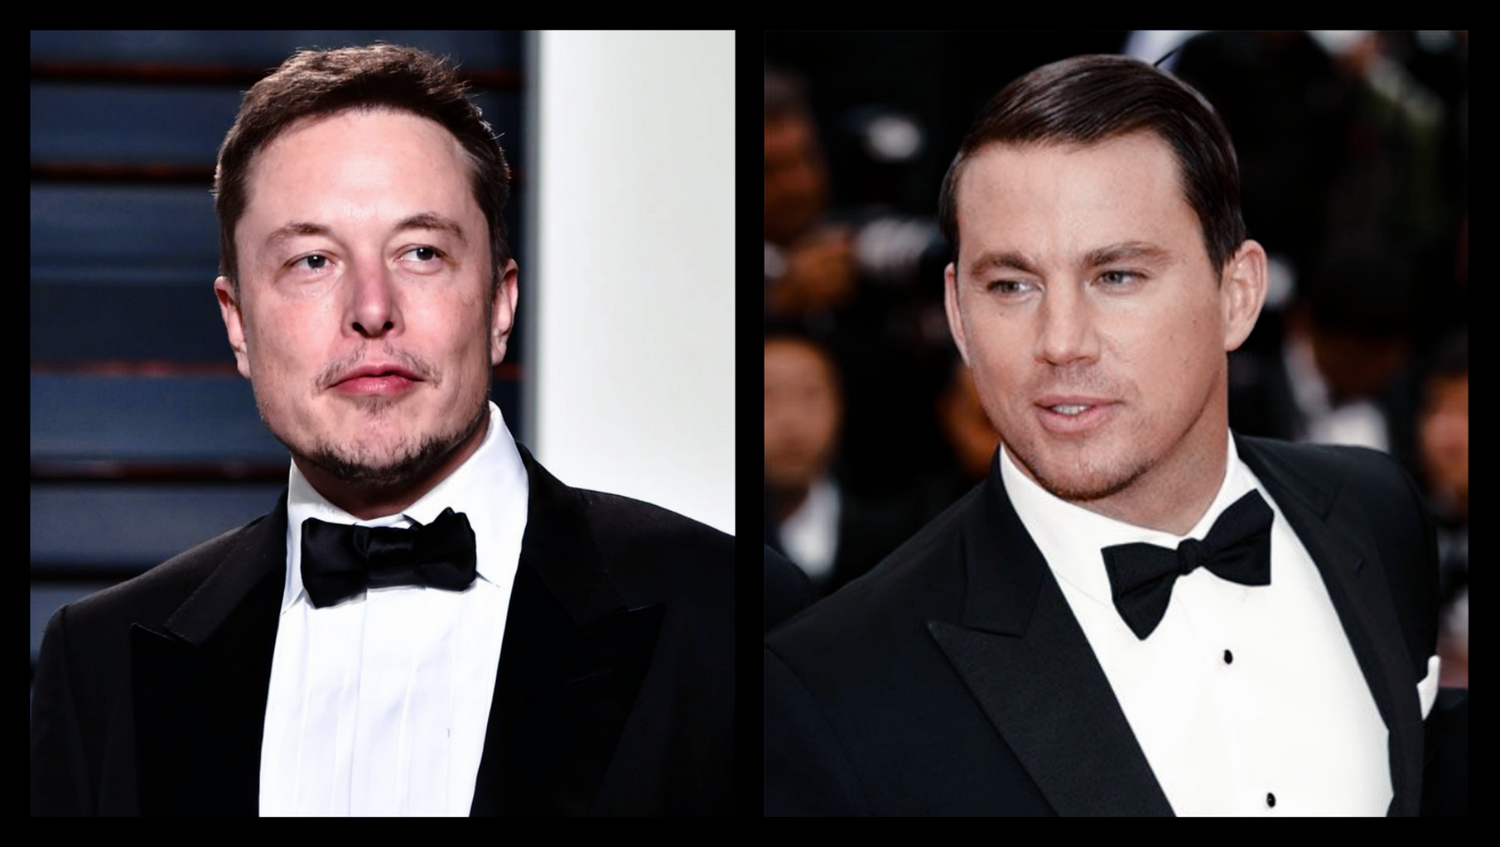 Channing Tatum will produce an HBO series about Elon Musk's SpaceX